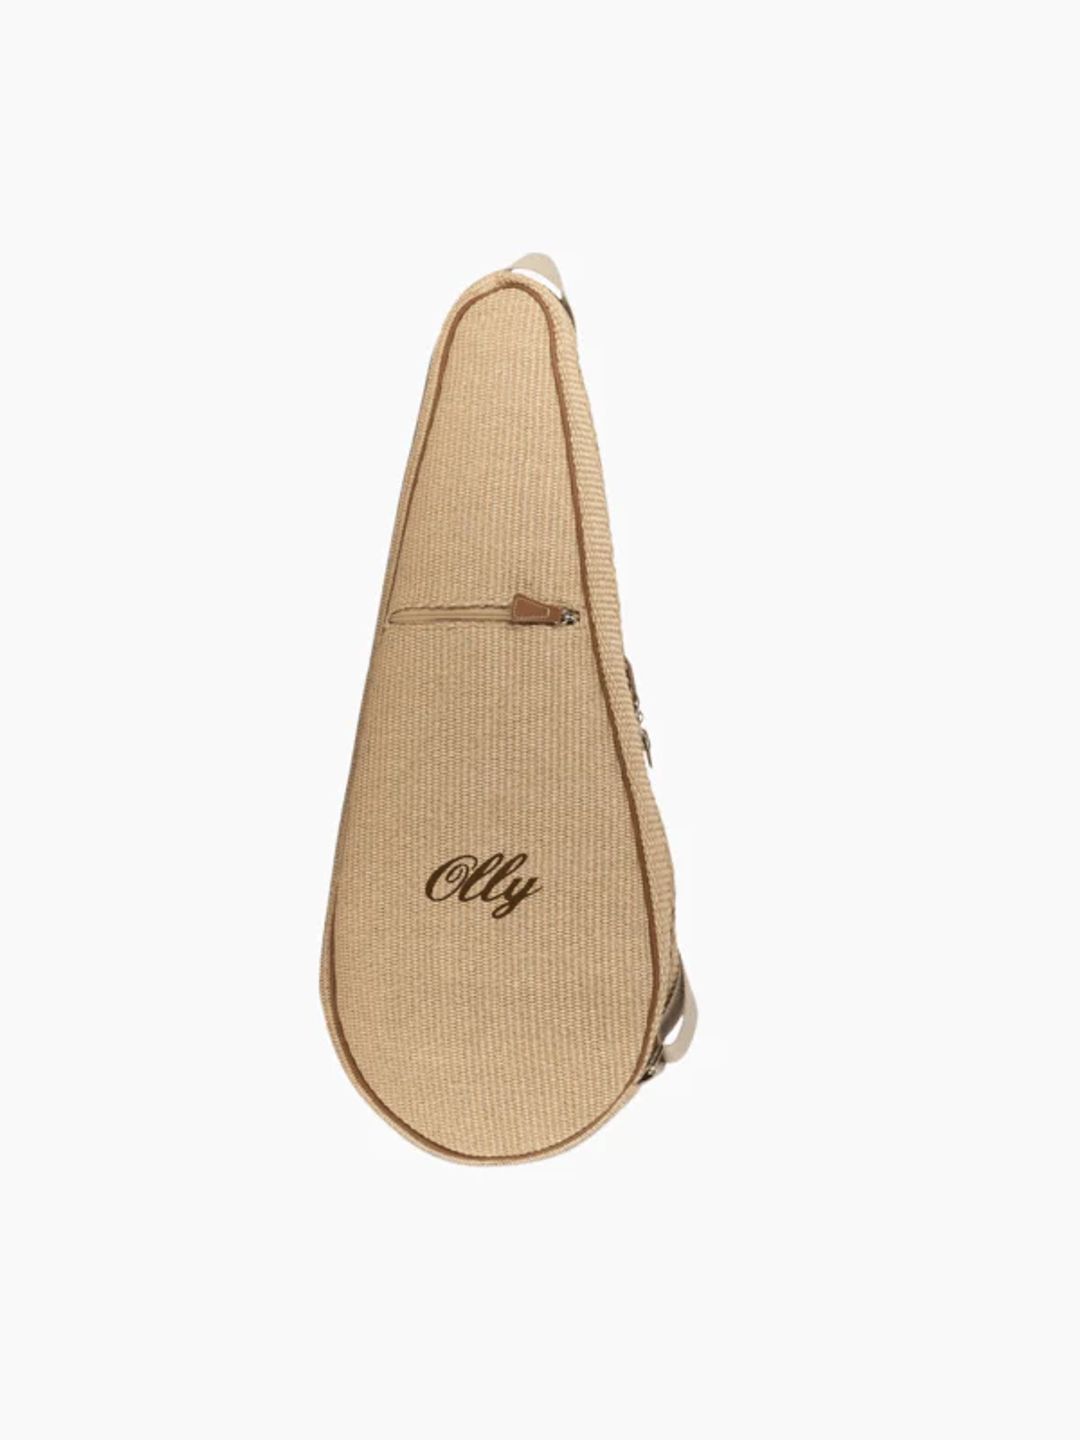 Straw Tennis Racket Case - My Style Bags